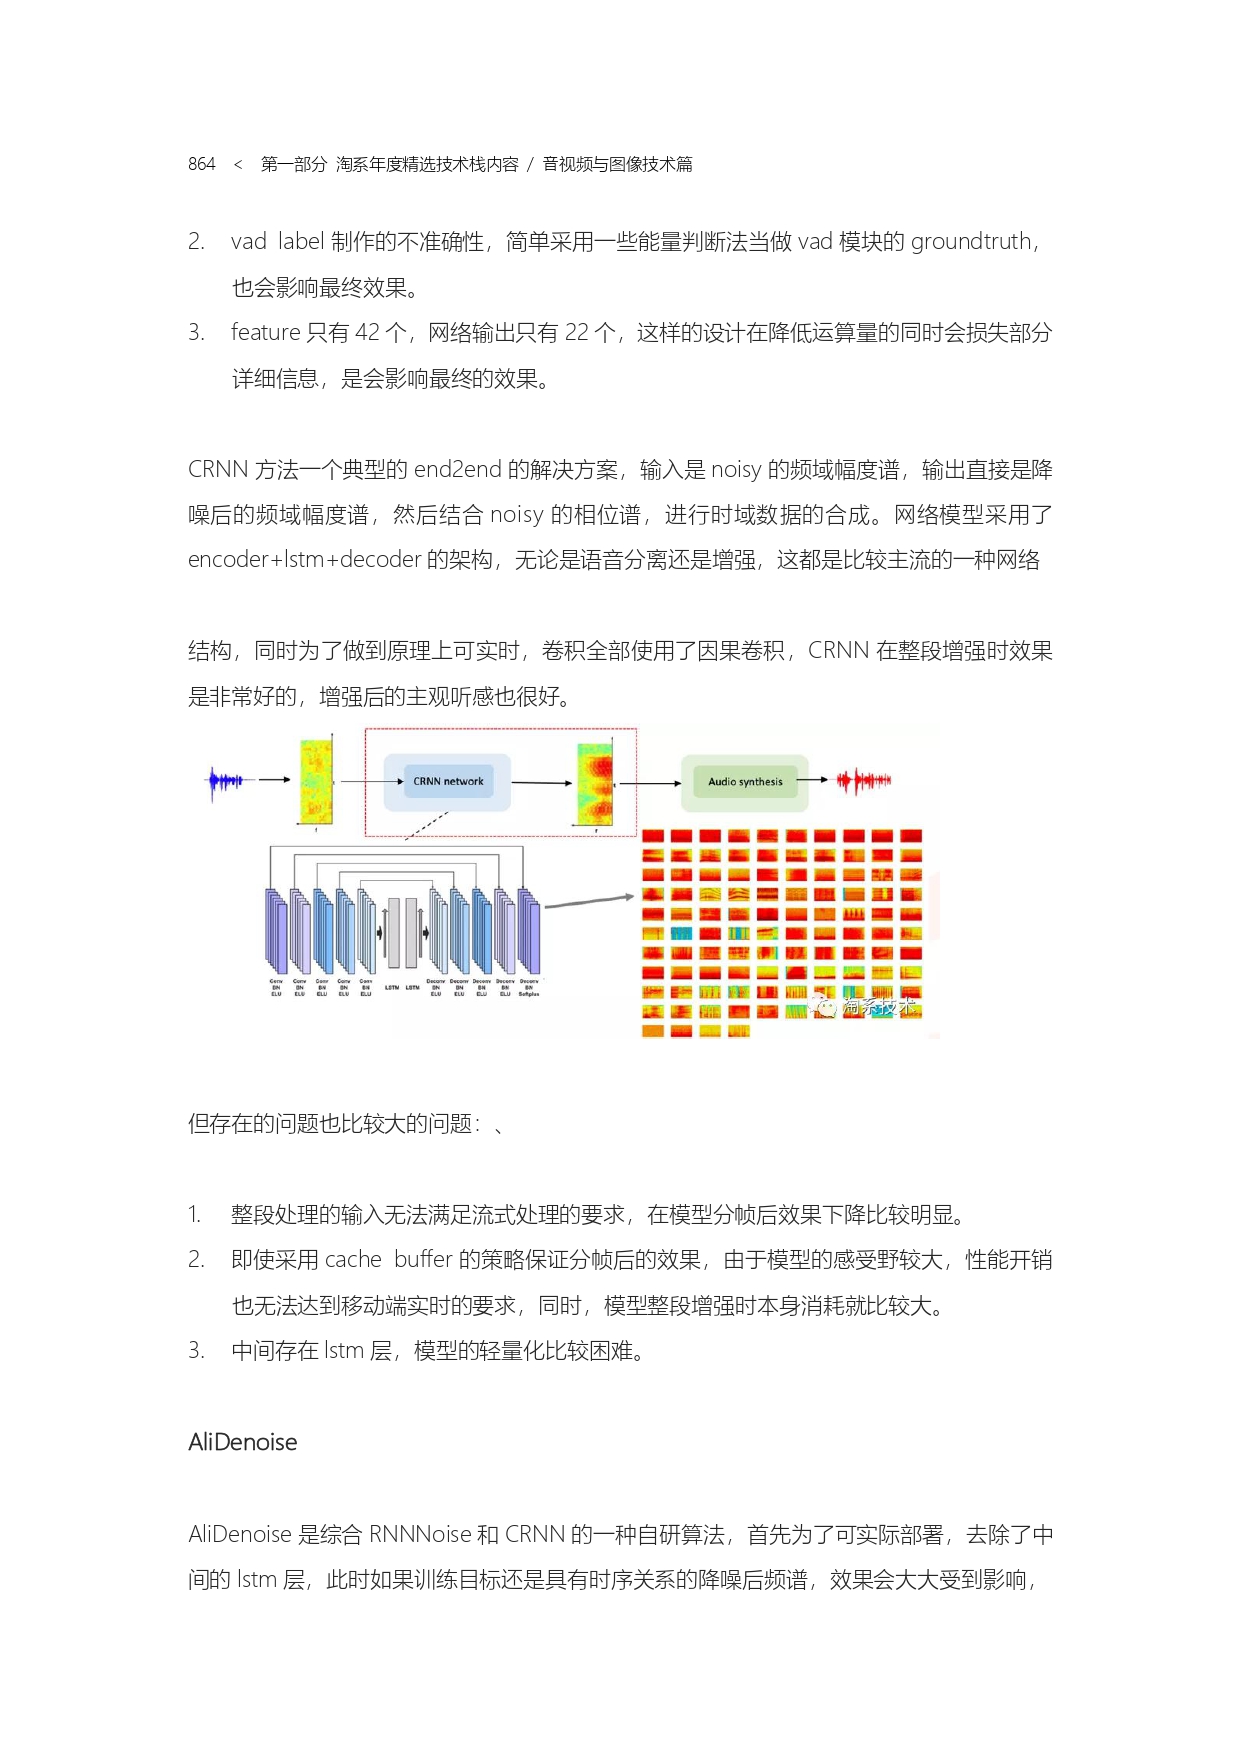 The Complete Works of Tao Technology 2020-571-1189-1-300_page-0294.jpg